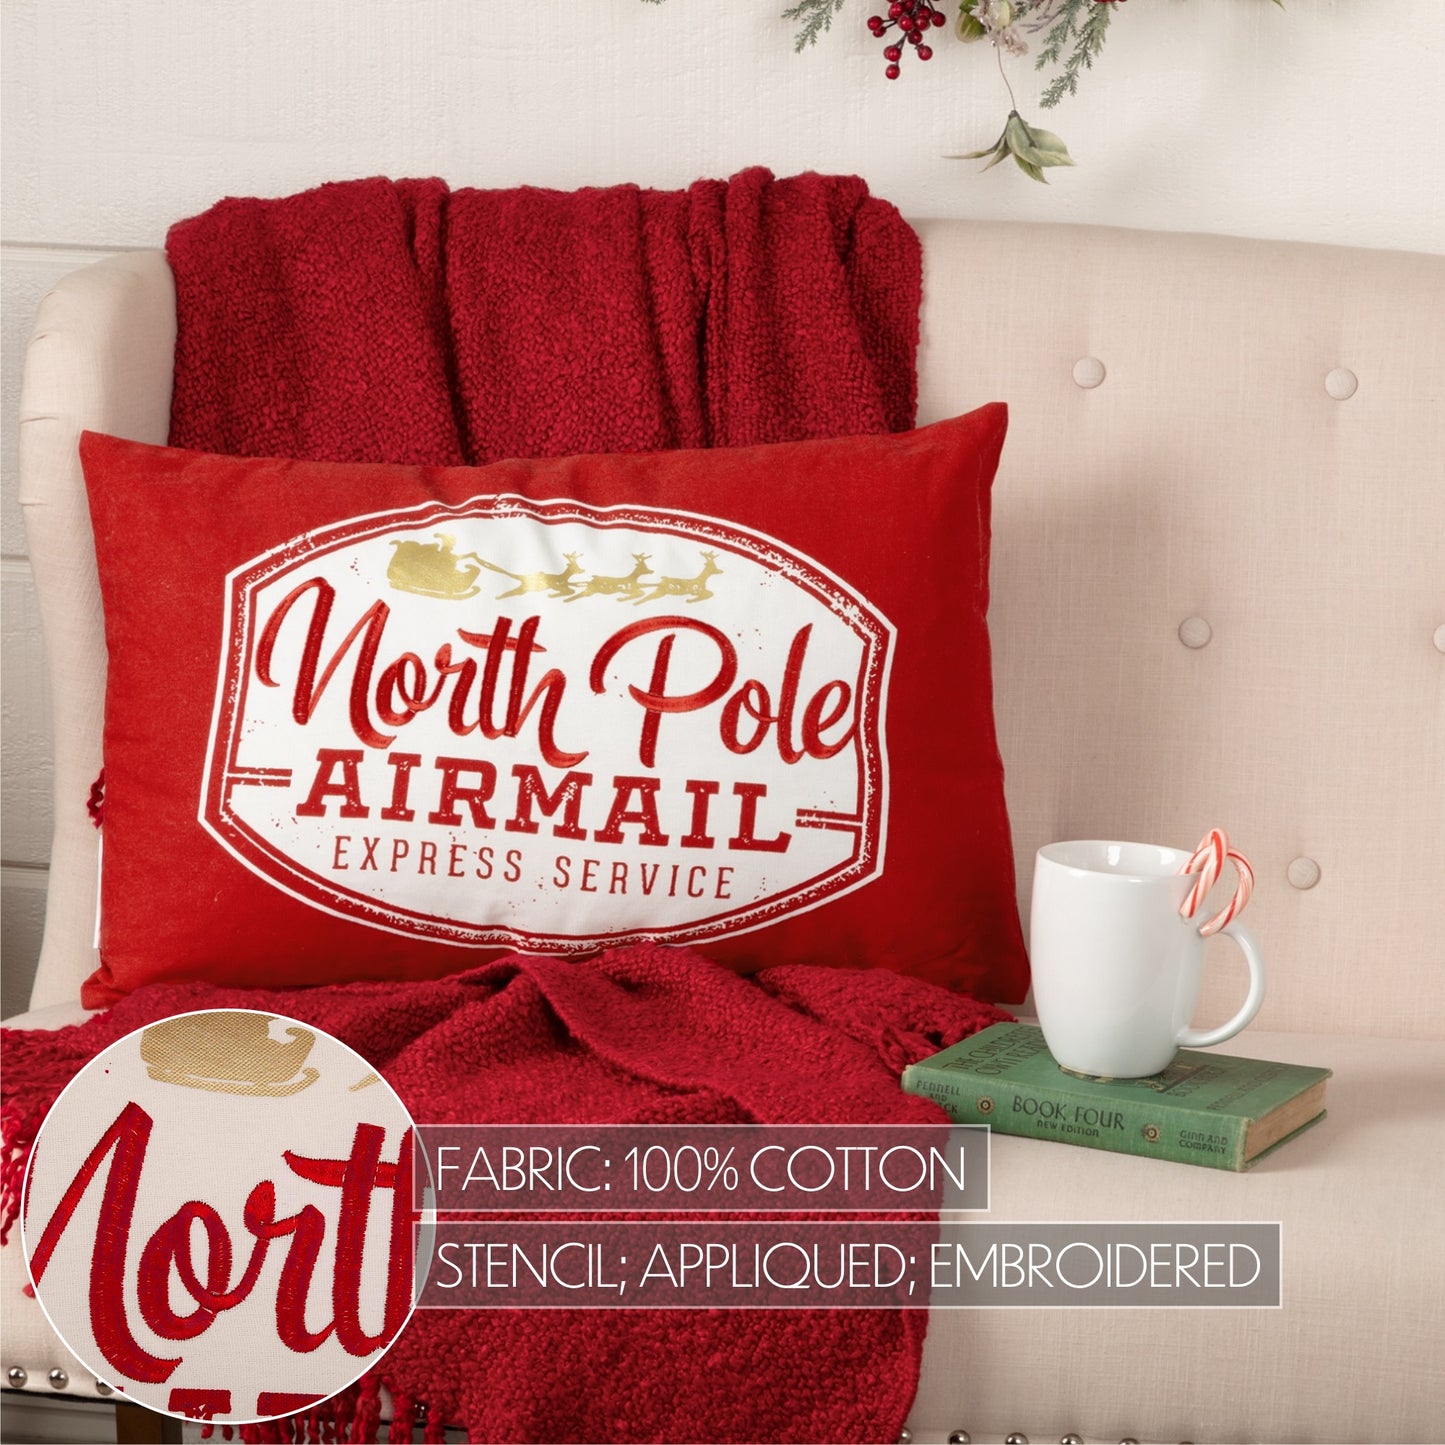 60359-North-Pole-Airmail-Pillow-14x22-image-6